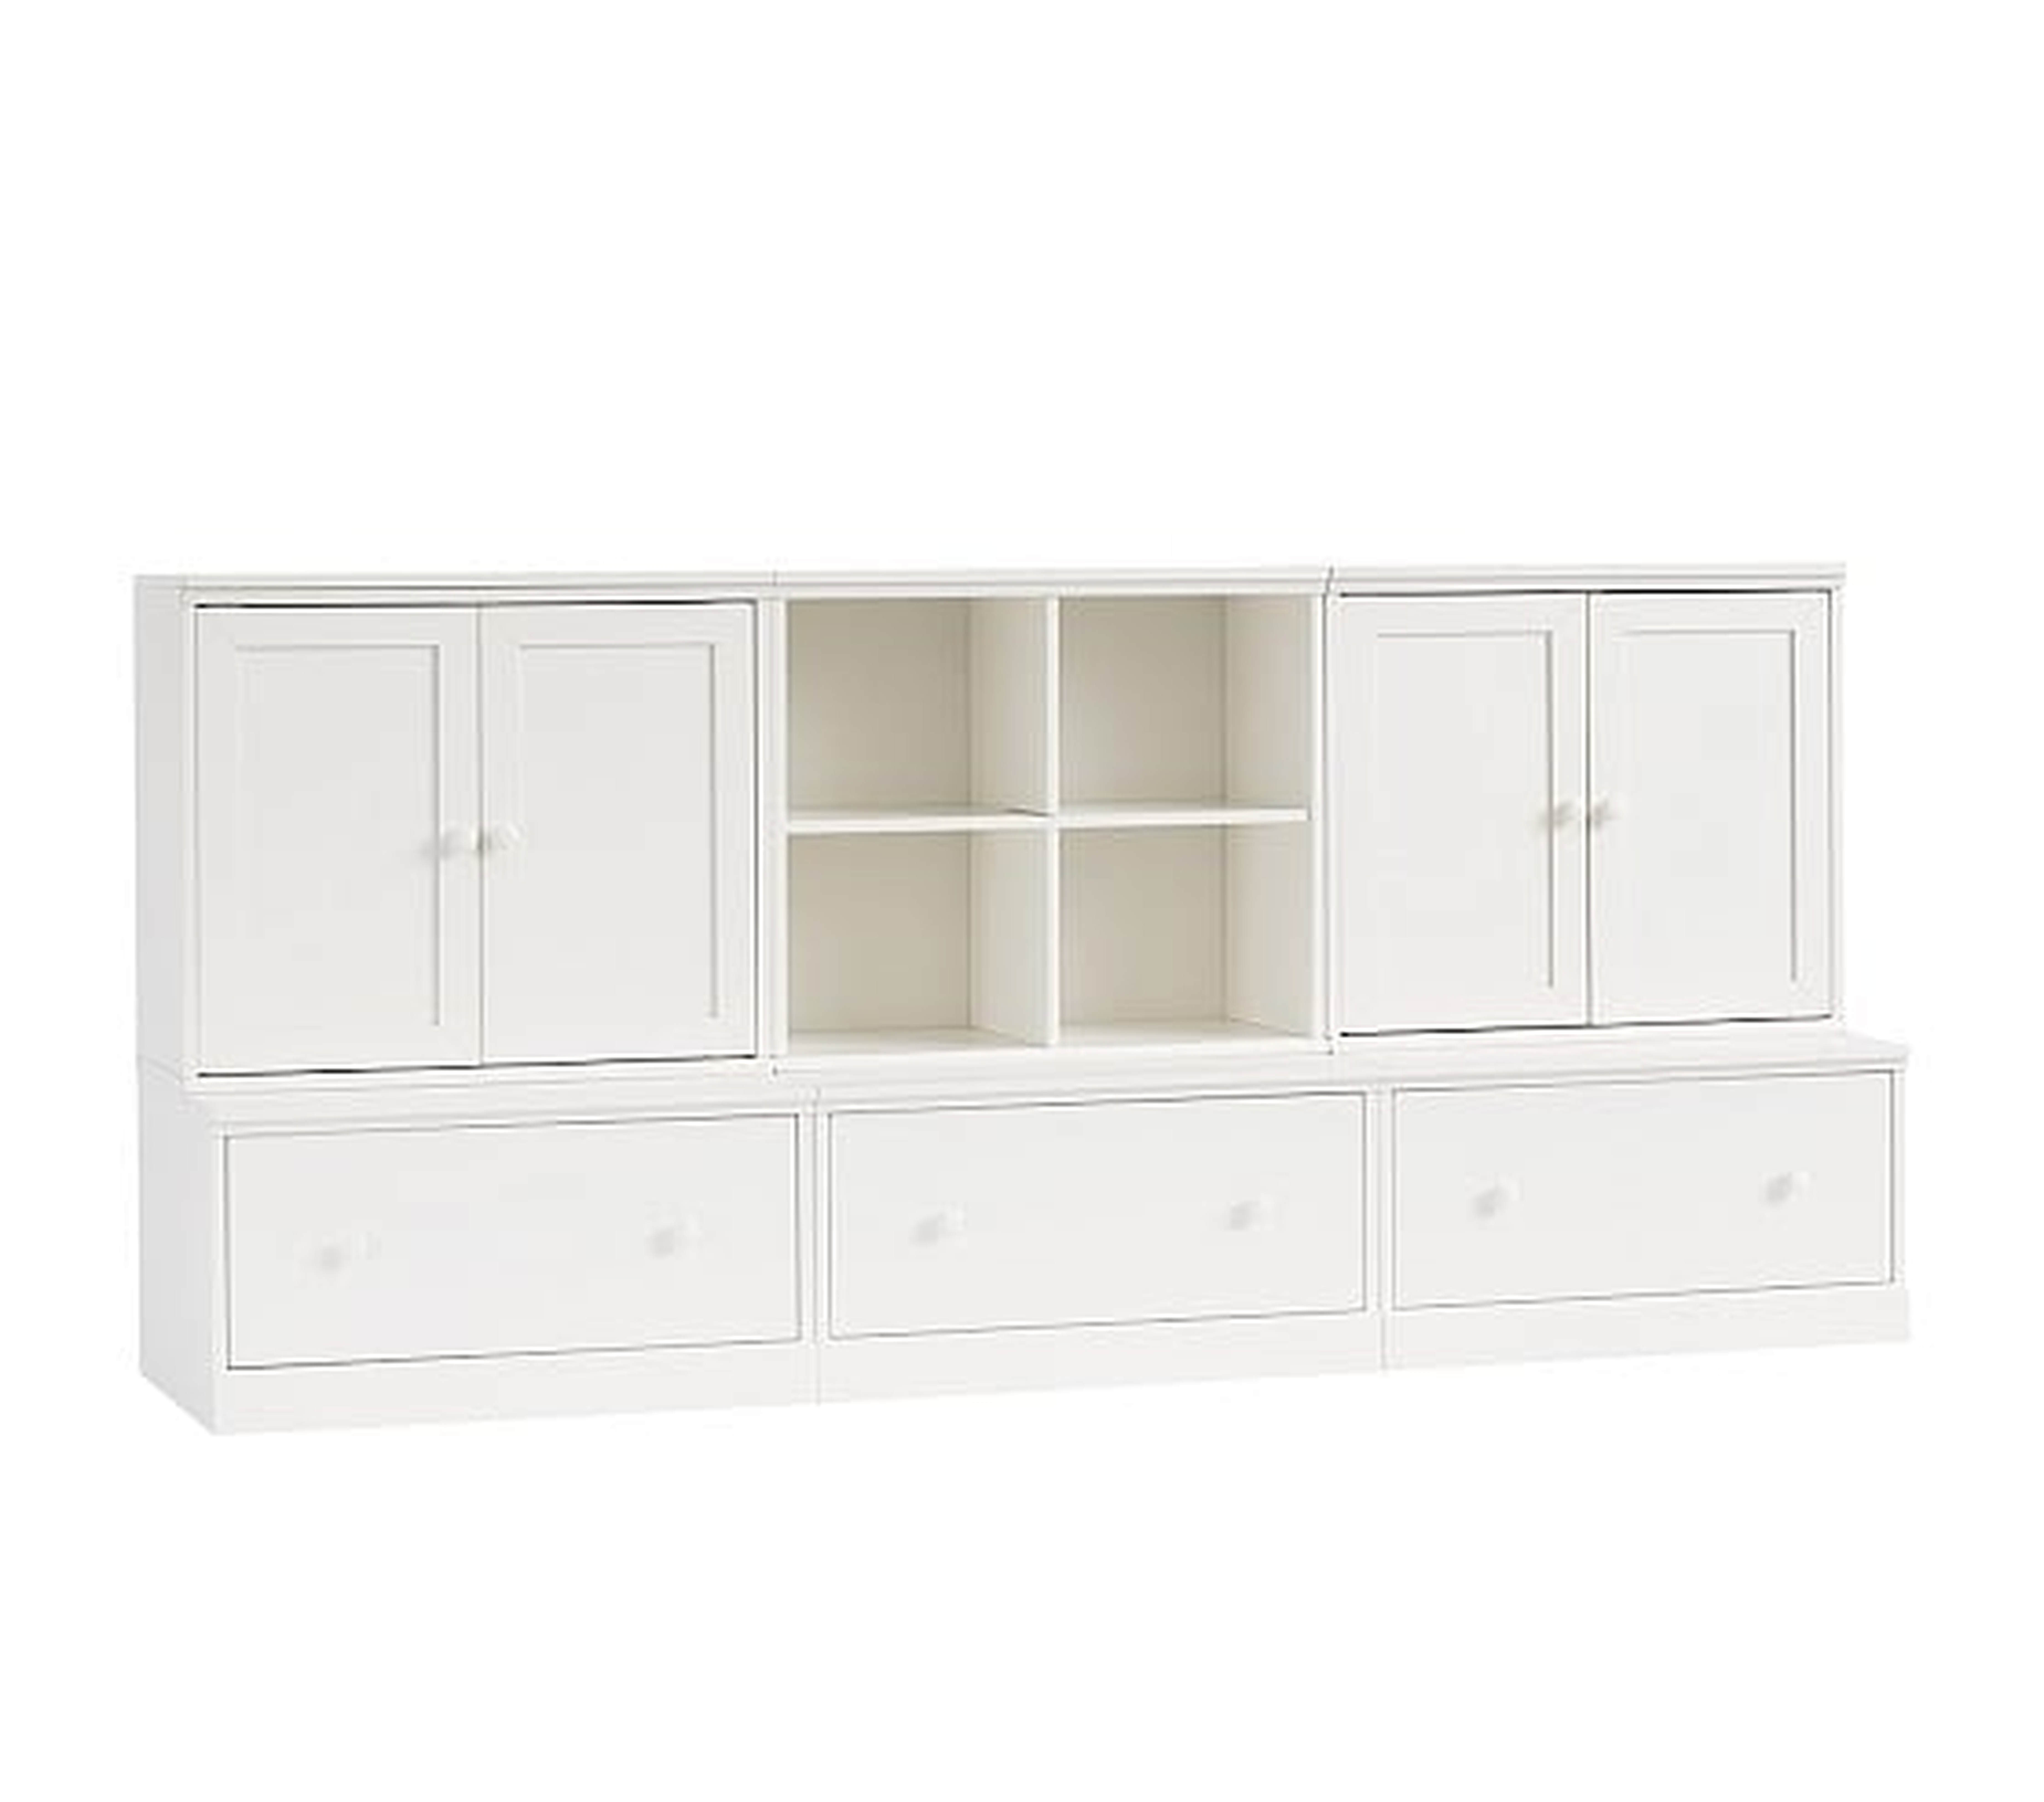 Cameron 1 Cubby, 2 Cabinets, & 3 Drawer Bases, Simply White, UPS - Pottery Barn Kids